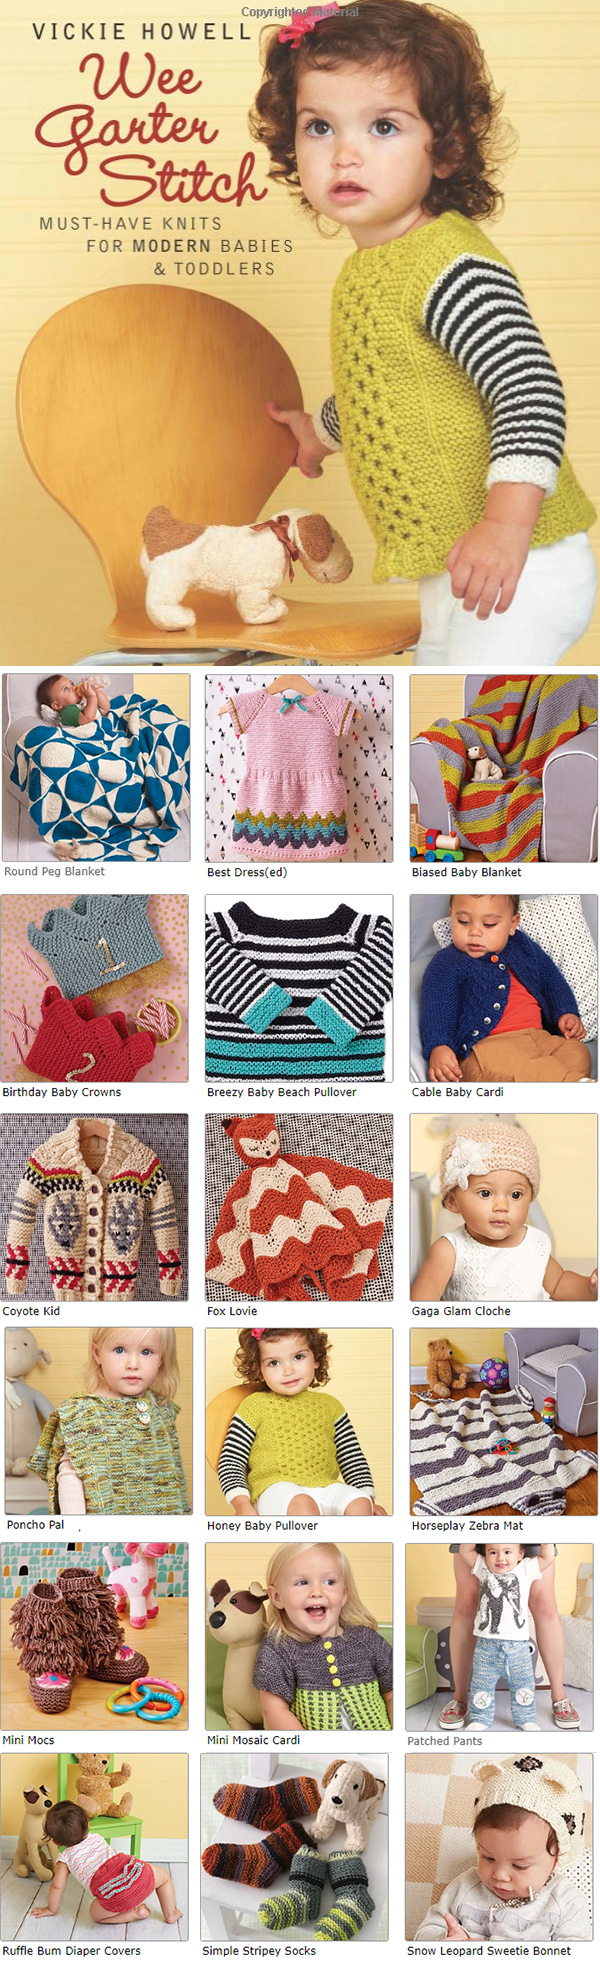 Knitting Pattern for Wee Garter Stitch: Must-Have Knits for Modern Babies & Toddlers